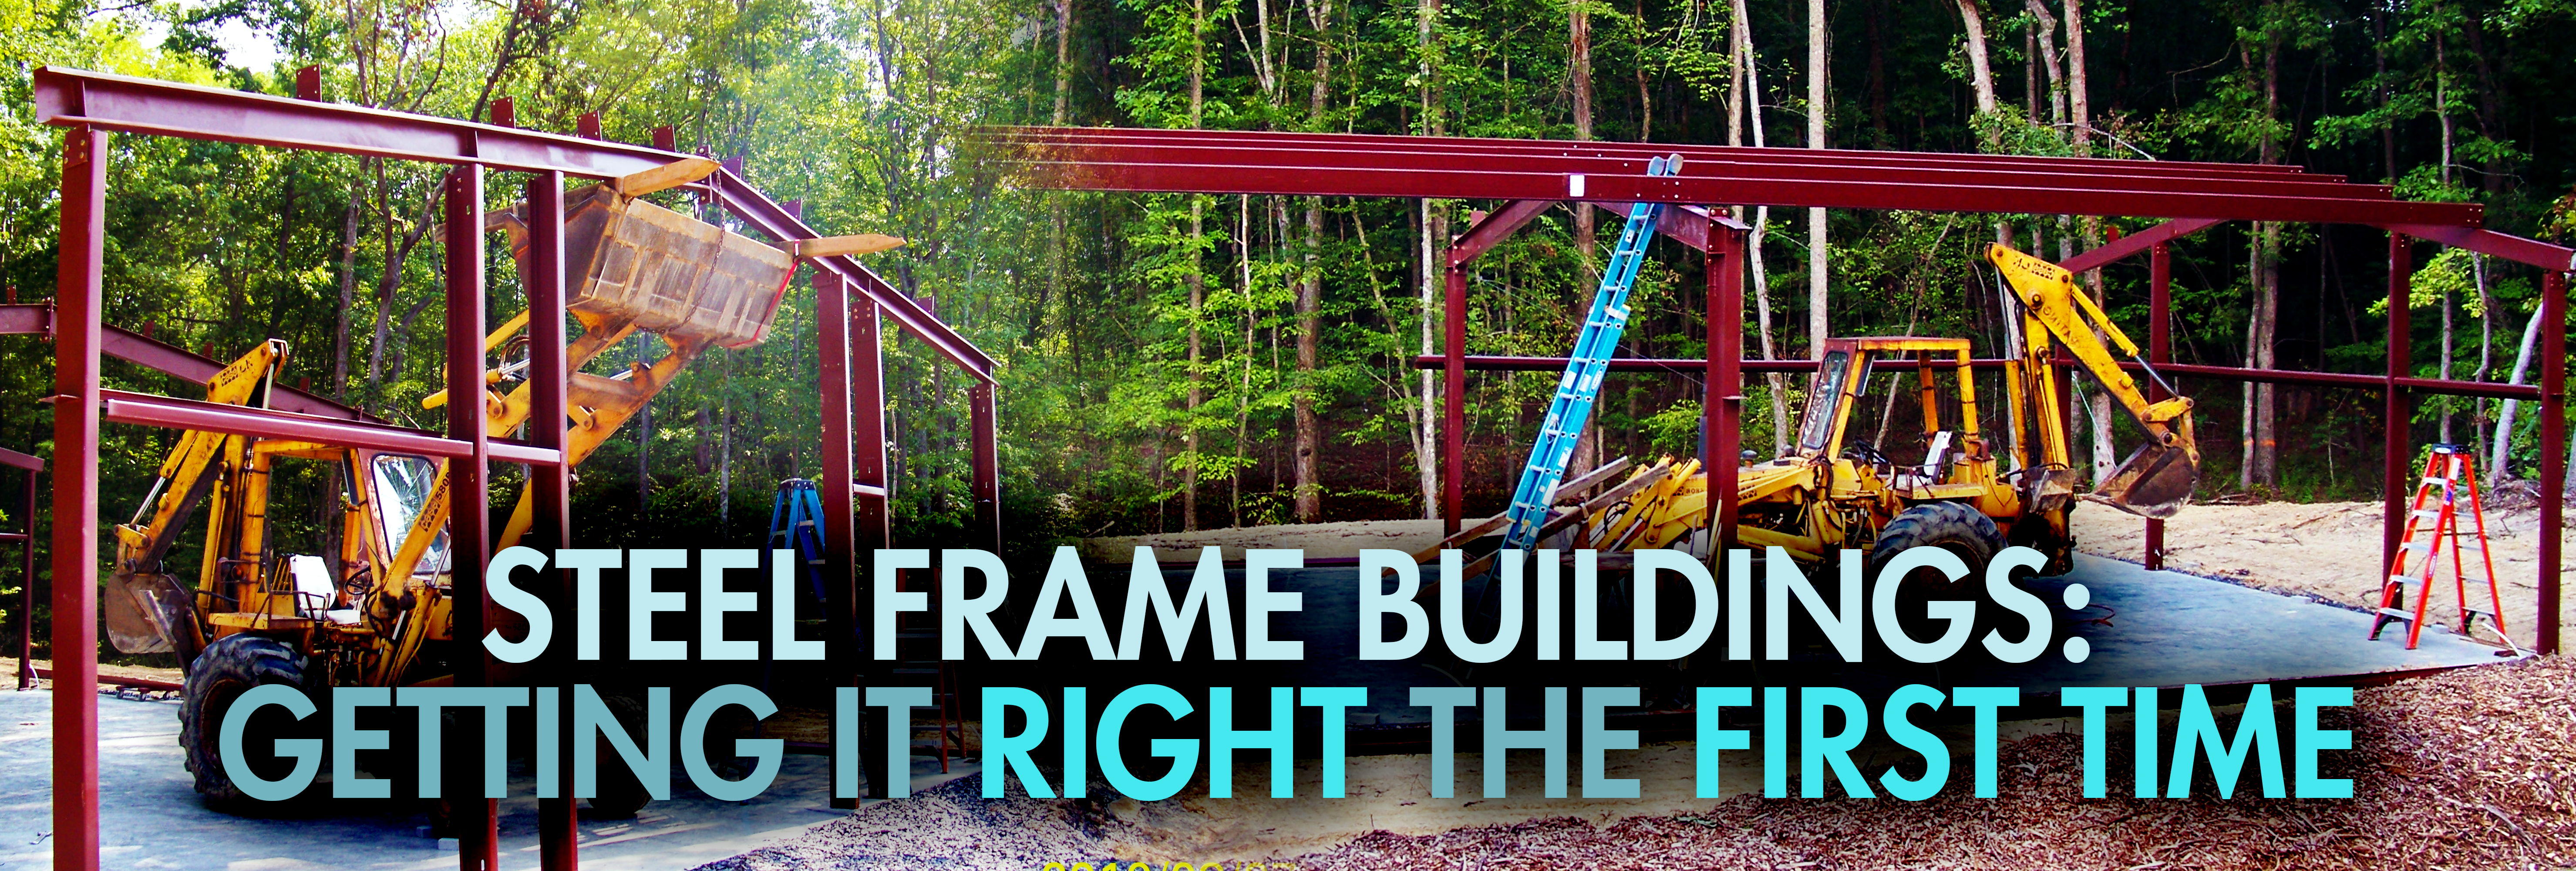 Constructing Your Own Industrial Steel Frame Building – DIY Tips and Techniques